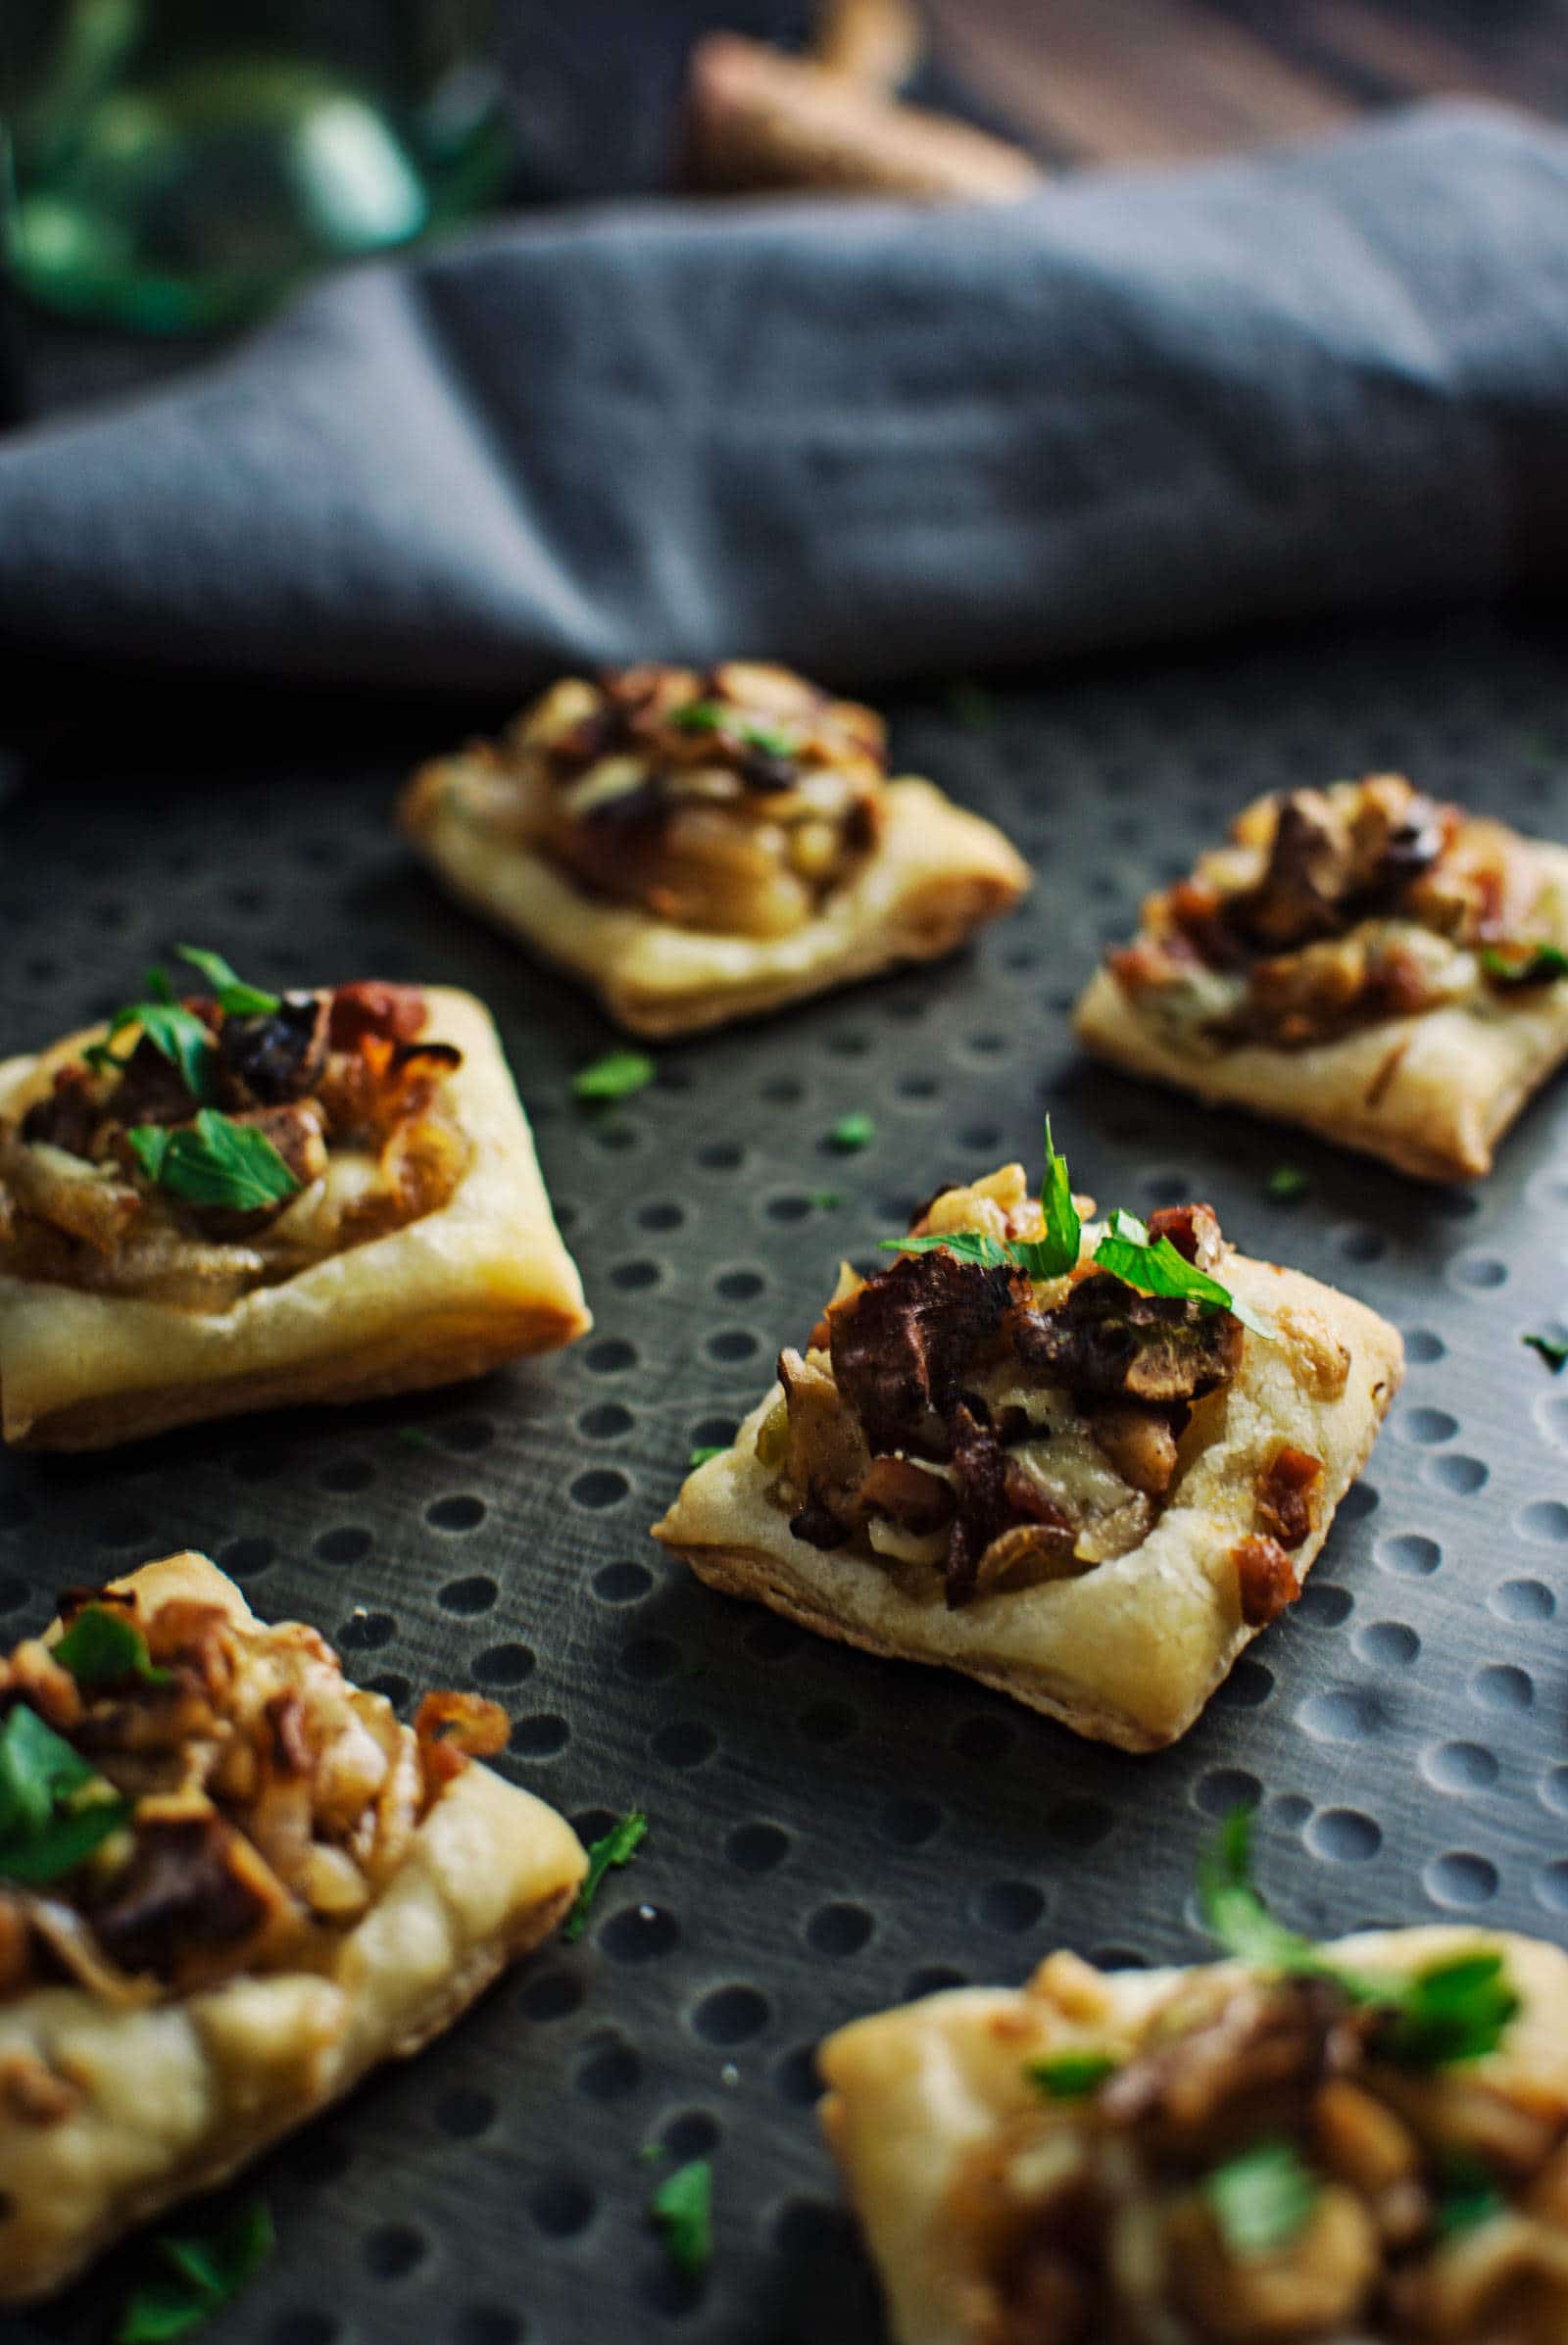 These tasty appetizers, Caramelized Shallot Tarts, are so easy to make and great to share with friends, family and @CavitWines! #Cavitwines #LivetheCavitLife #ad